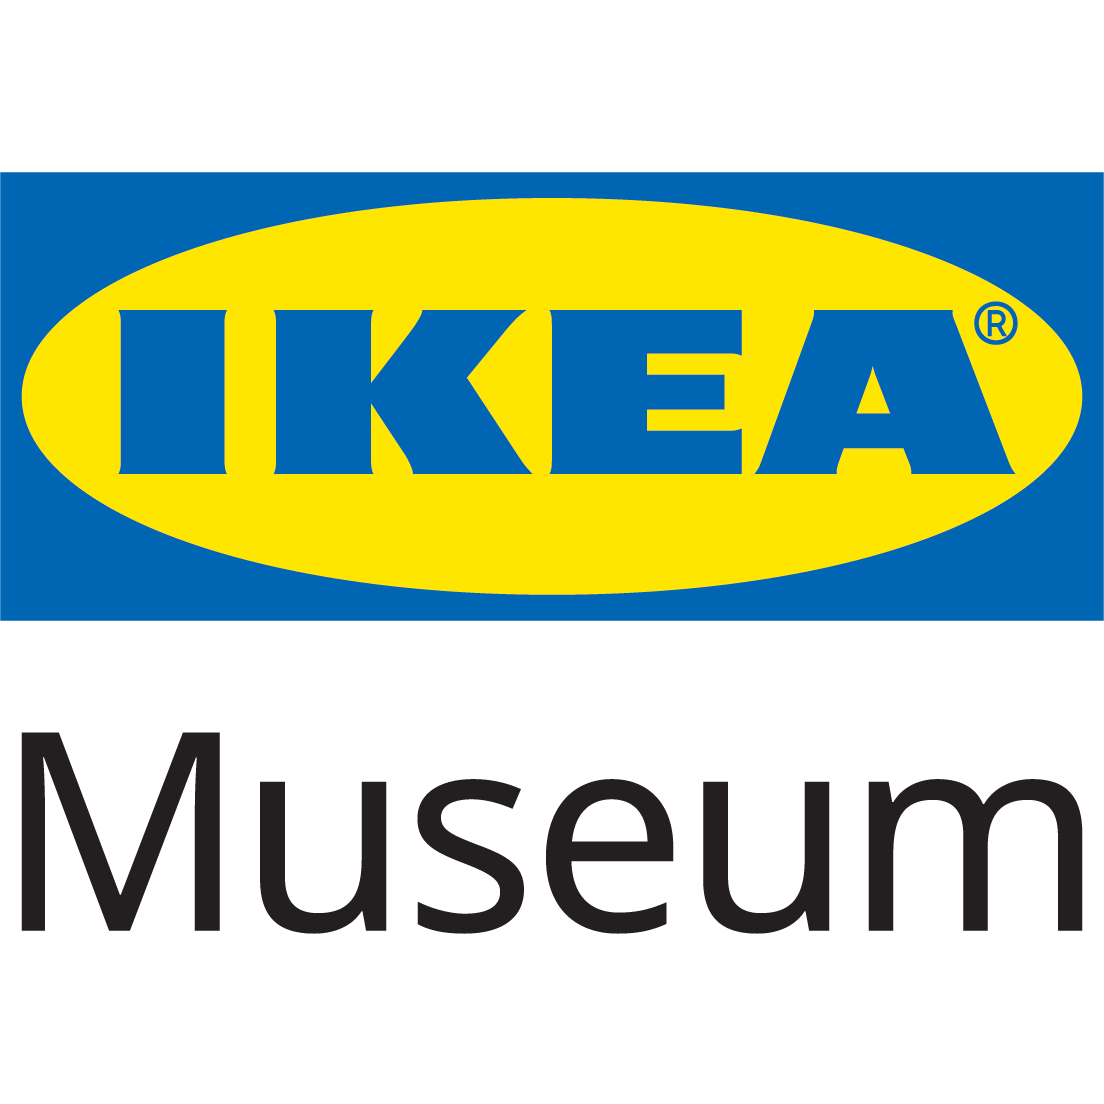 Browse the IKEA catalogue from 1989 - IKEA Museum